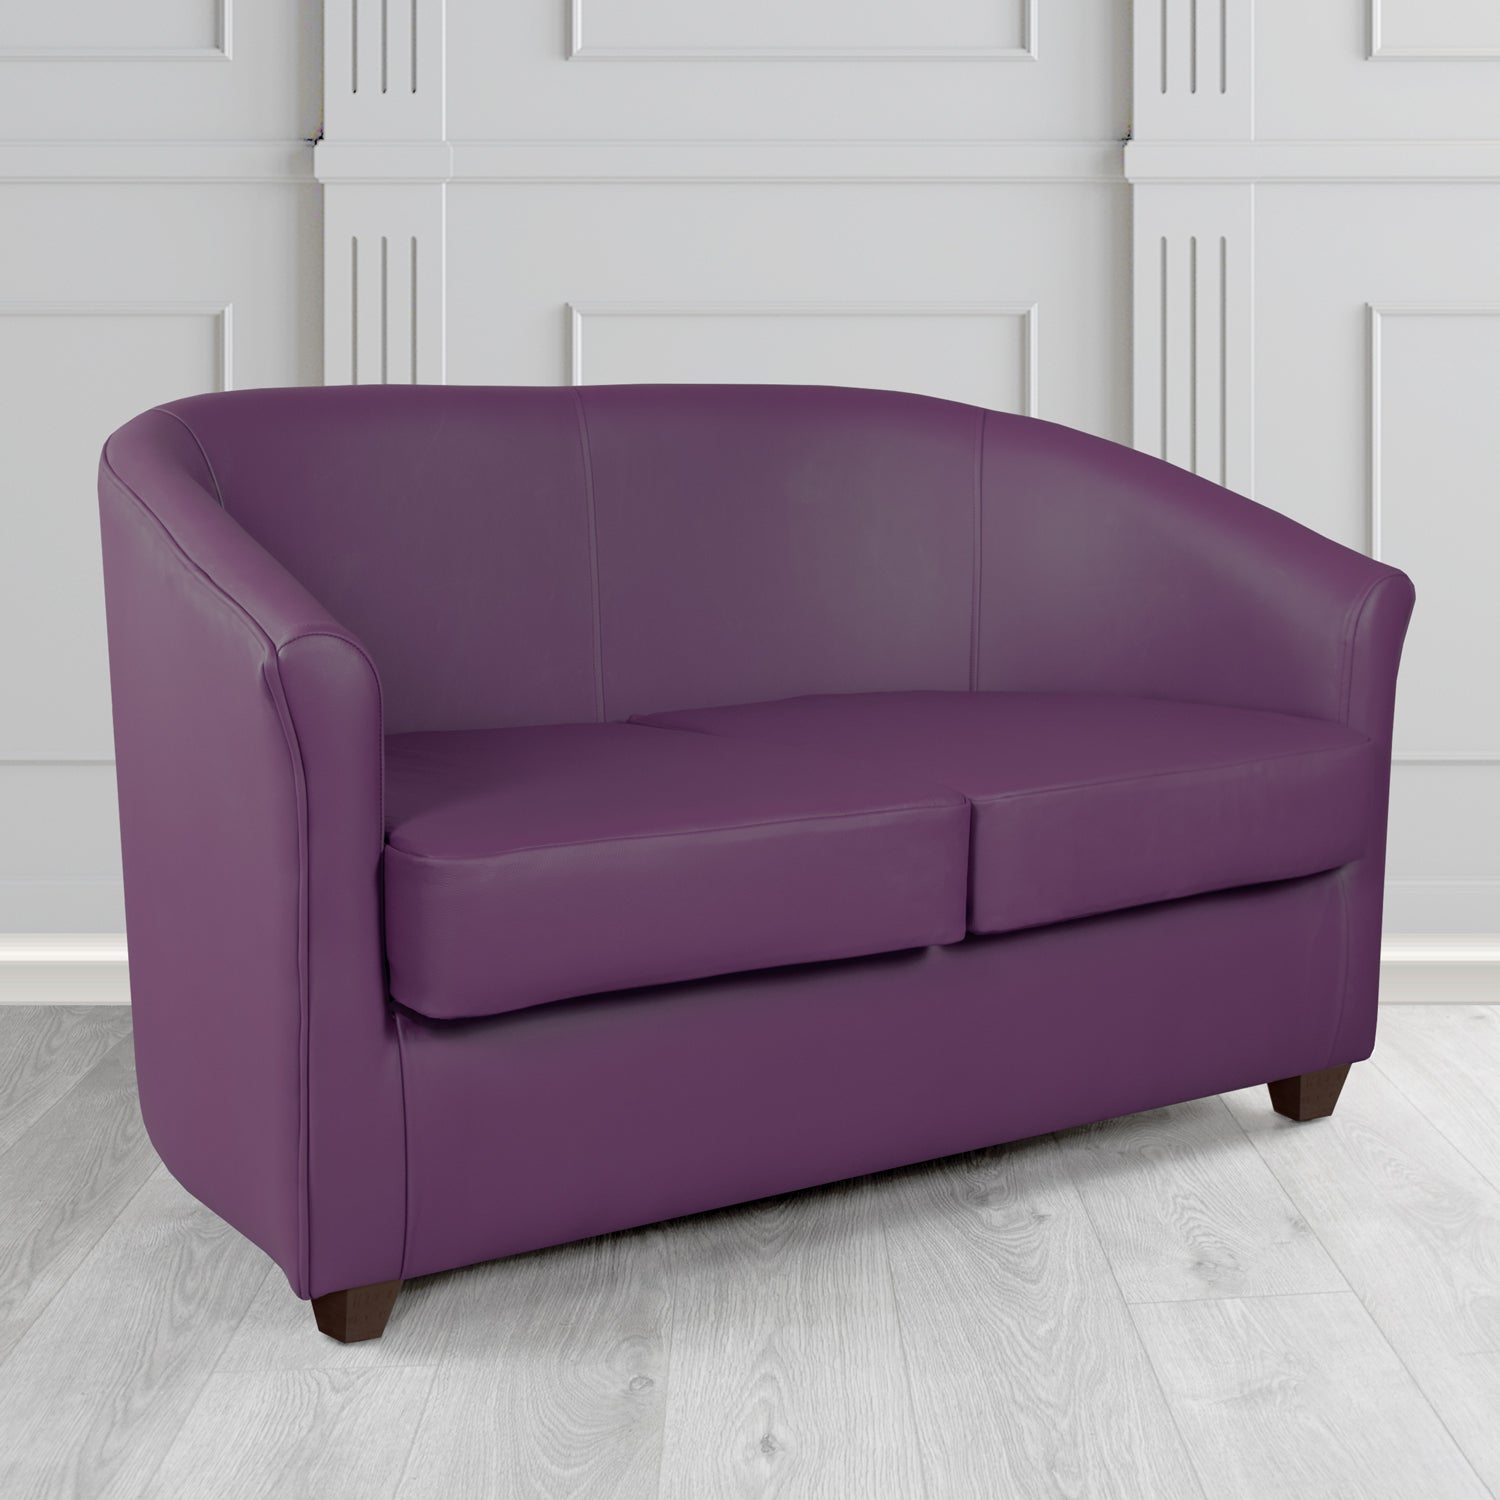 Cannes 2 Seater Tub Sofa in Just Colour Damson Crib 5 Faux Leather - The Tub Chair Shop